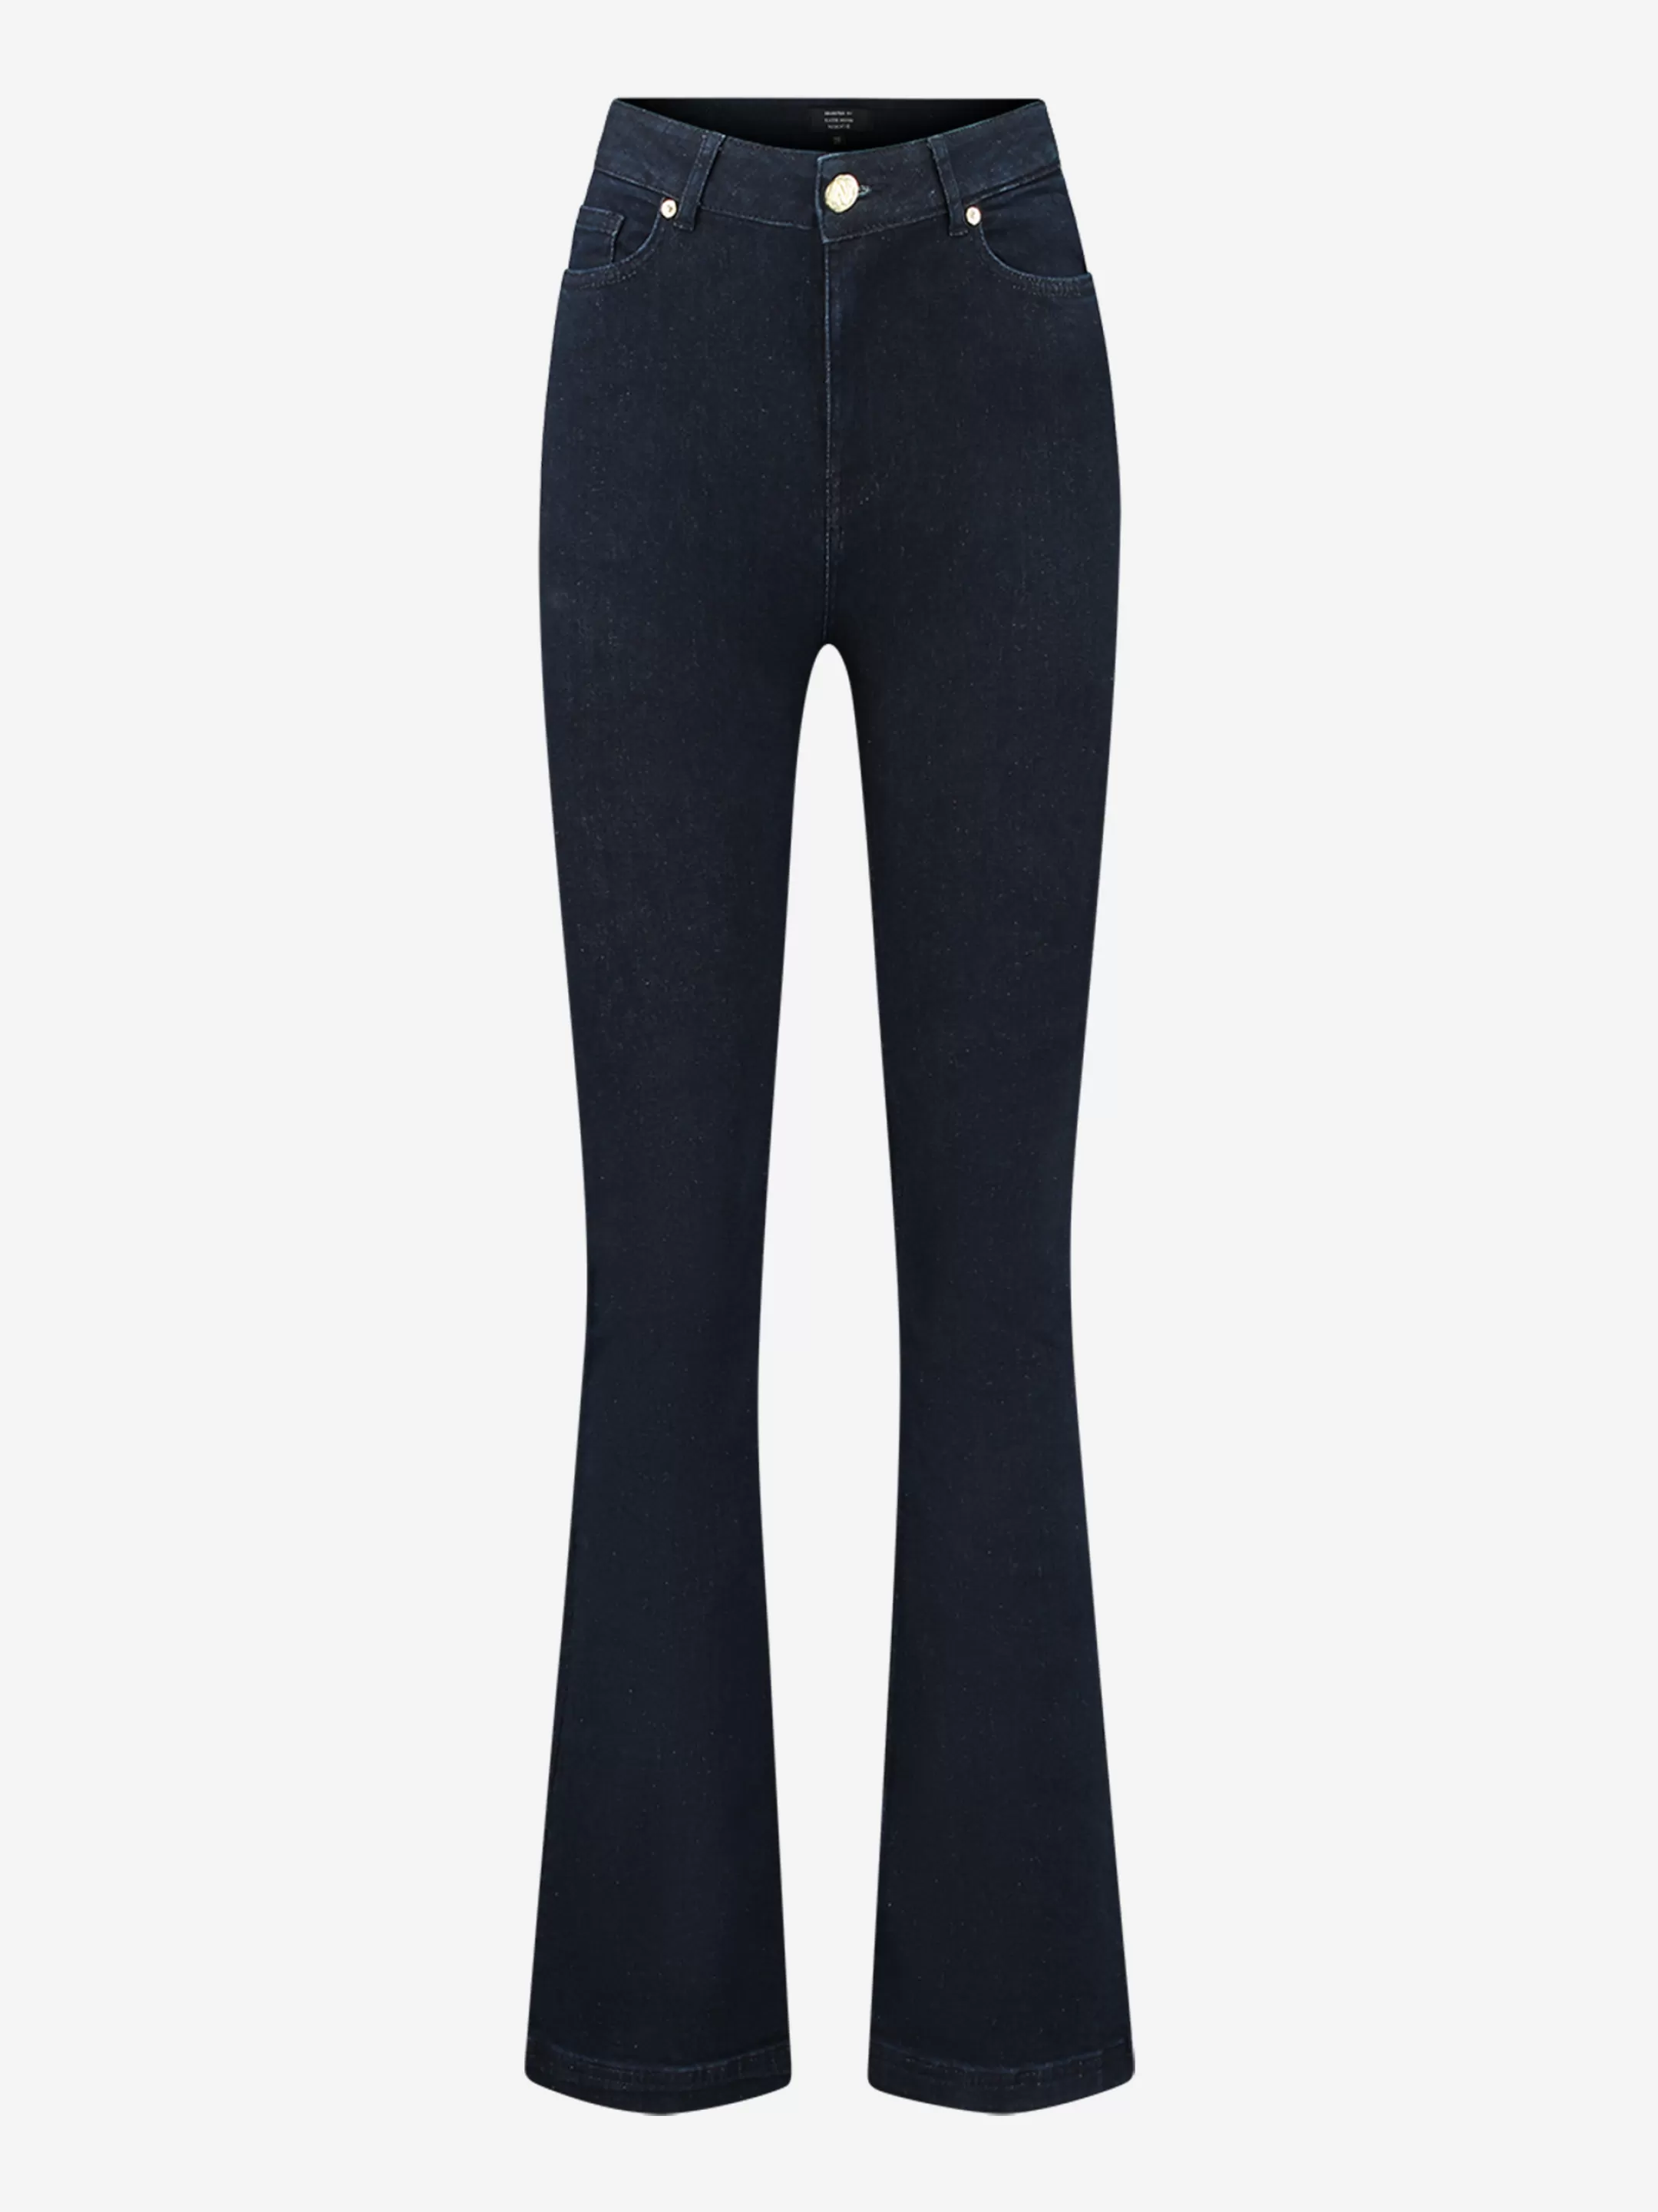 Cheap HIGH RISE FLARED JEANS Broeken | Selected by Kate Moss